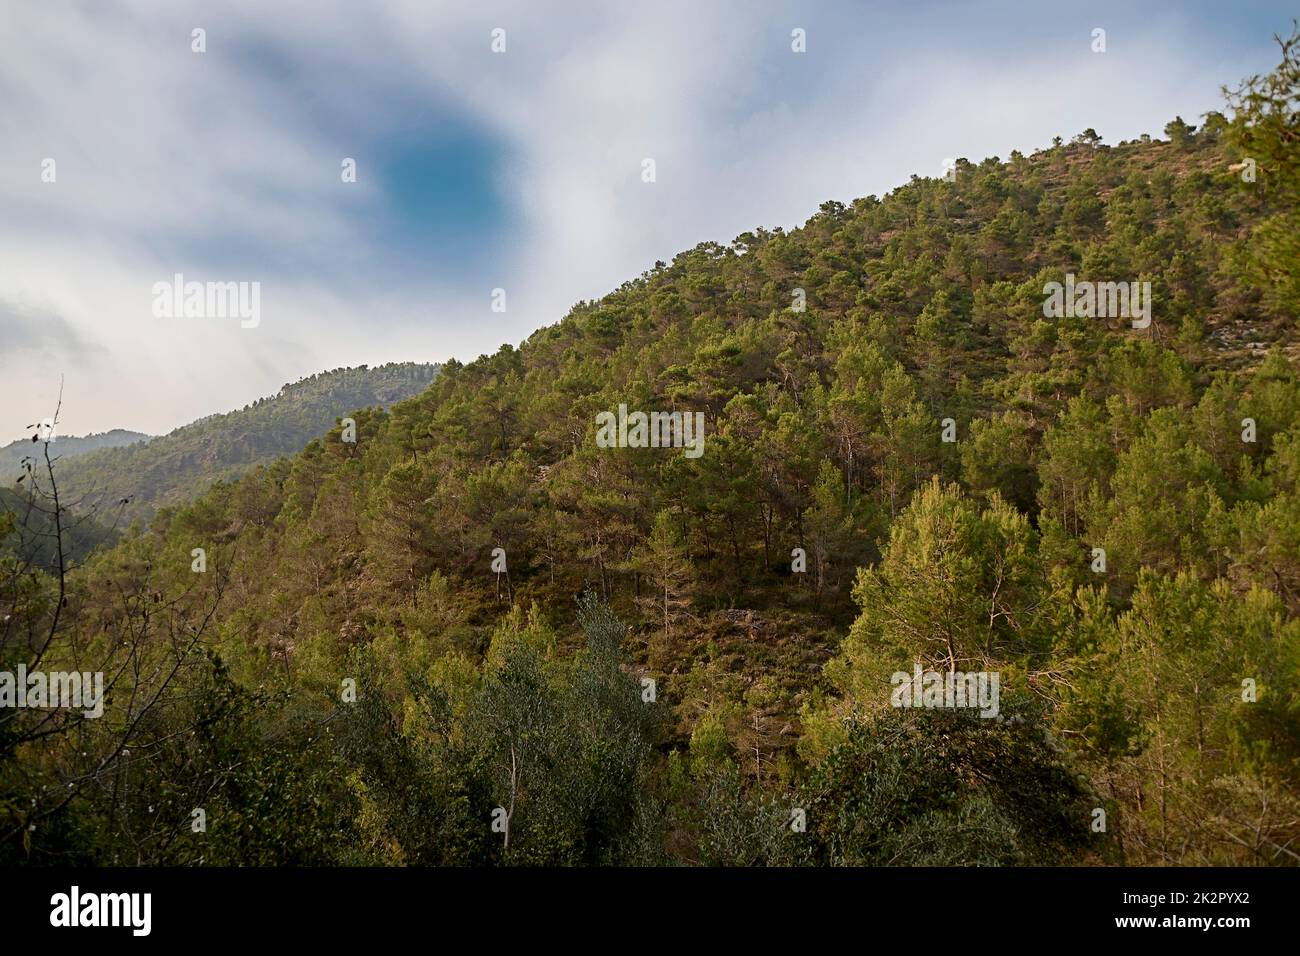 MOUNTAIN FULL OF PINE TREES WITH CLOUDY SKIES Stock Photo